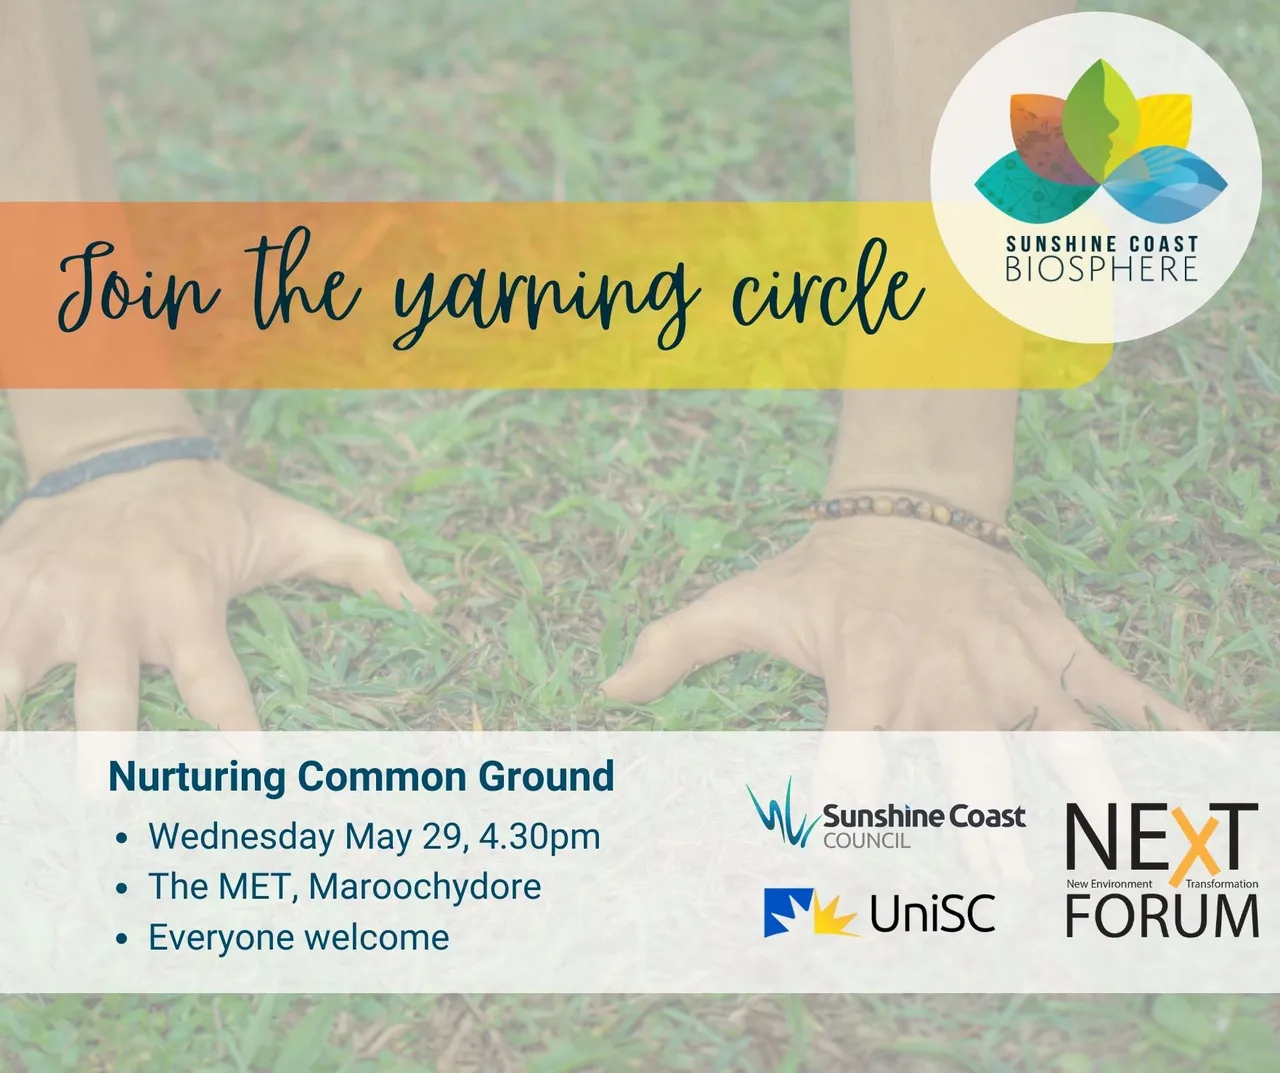 Yarning circle poster for event on 29 May